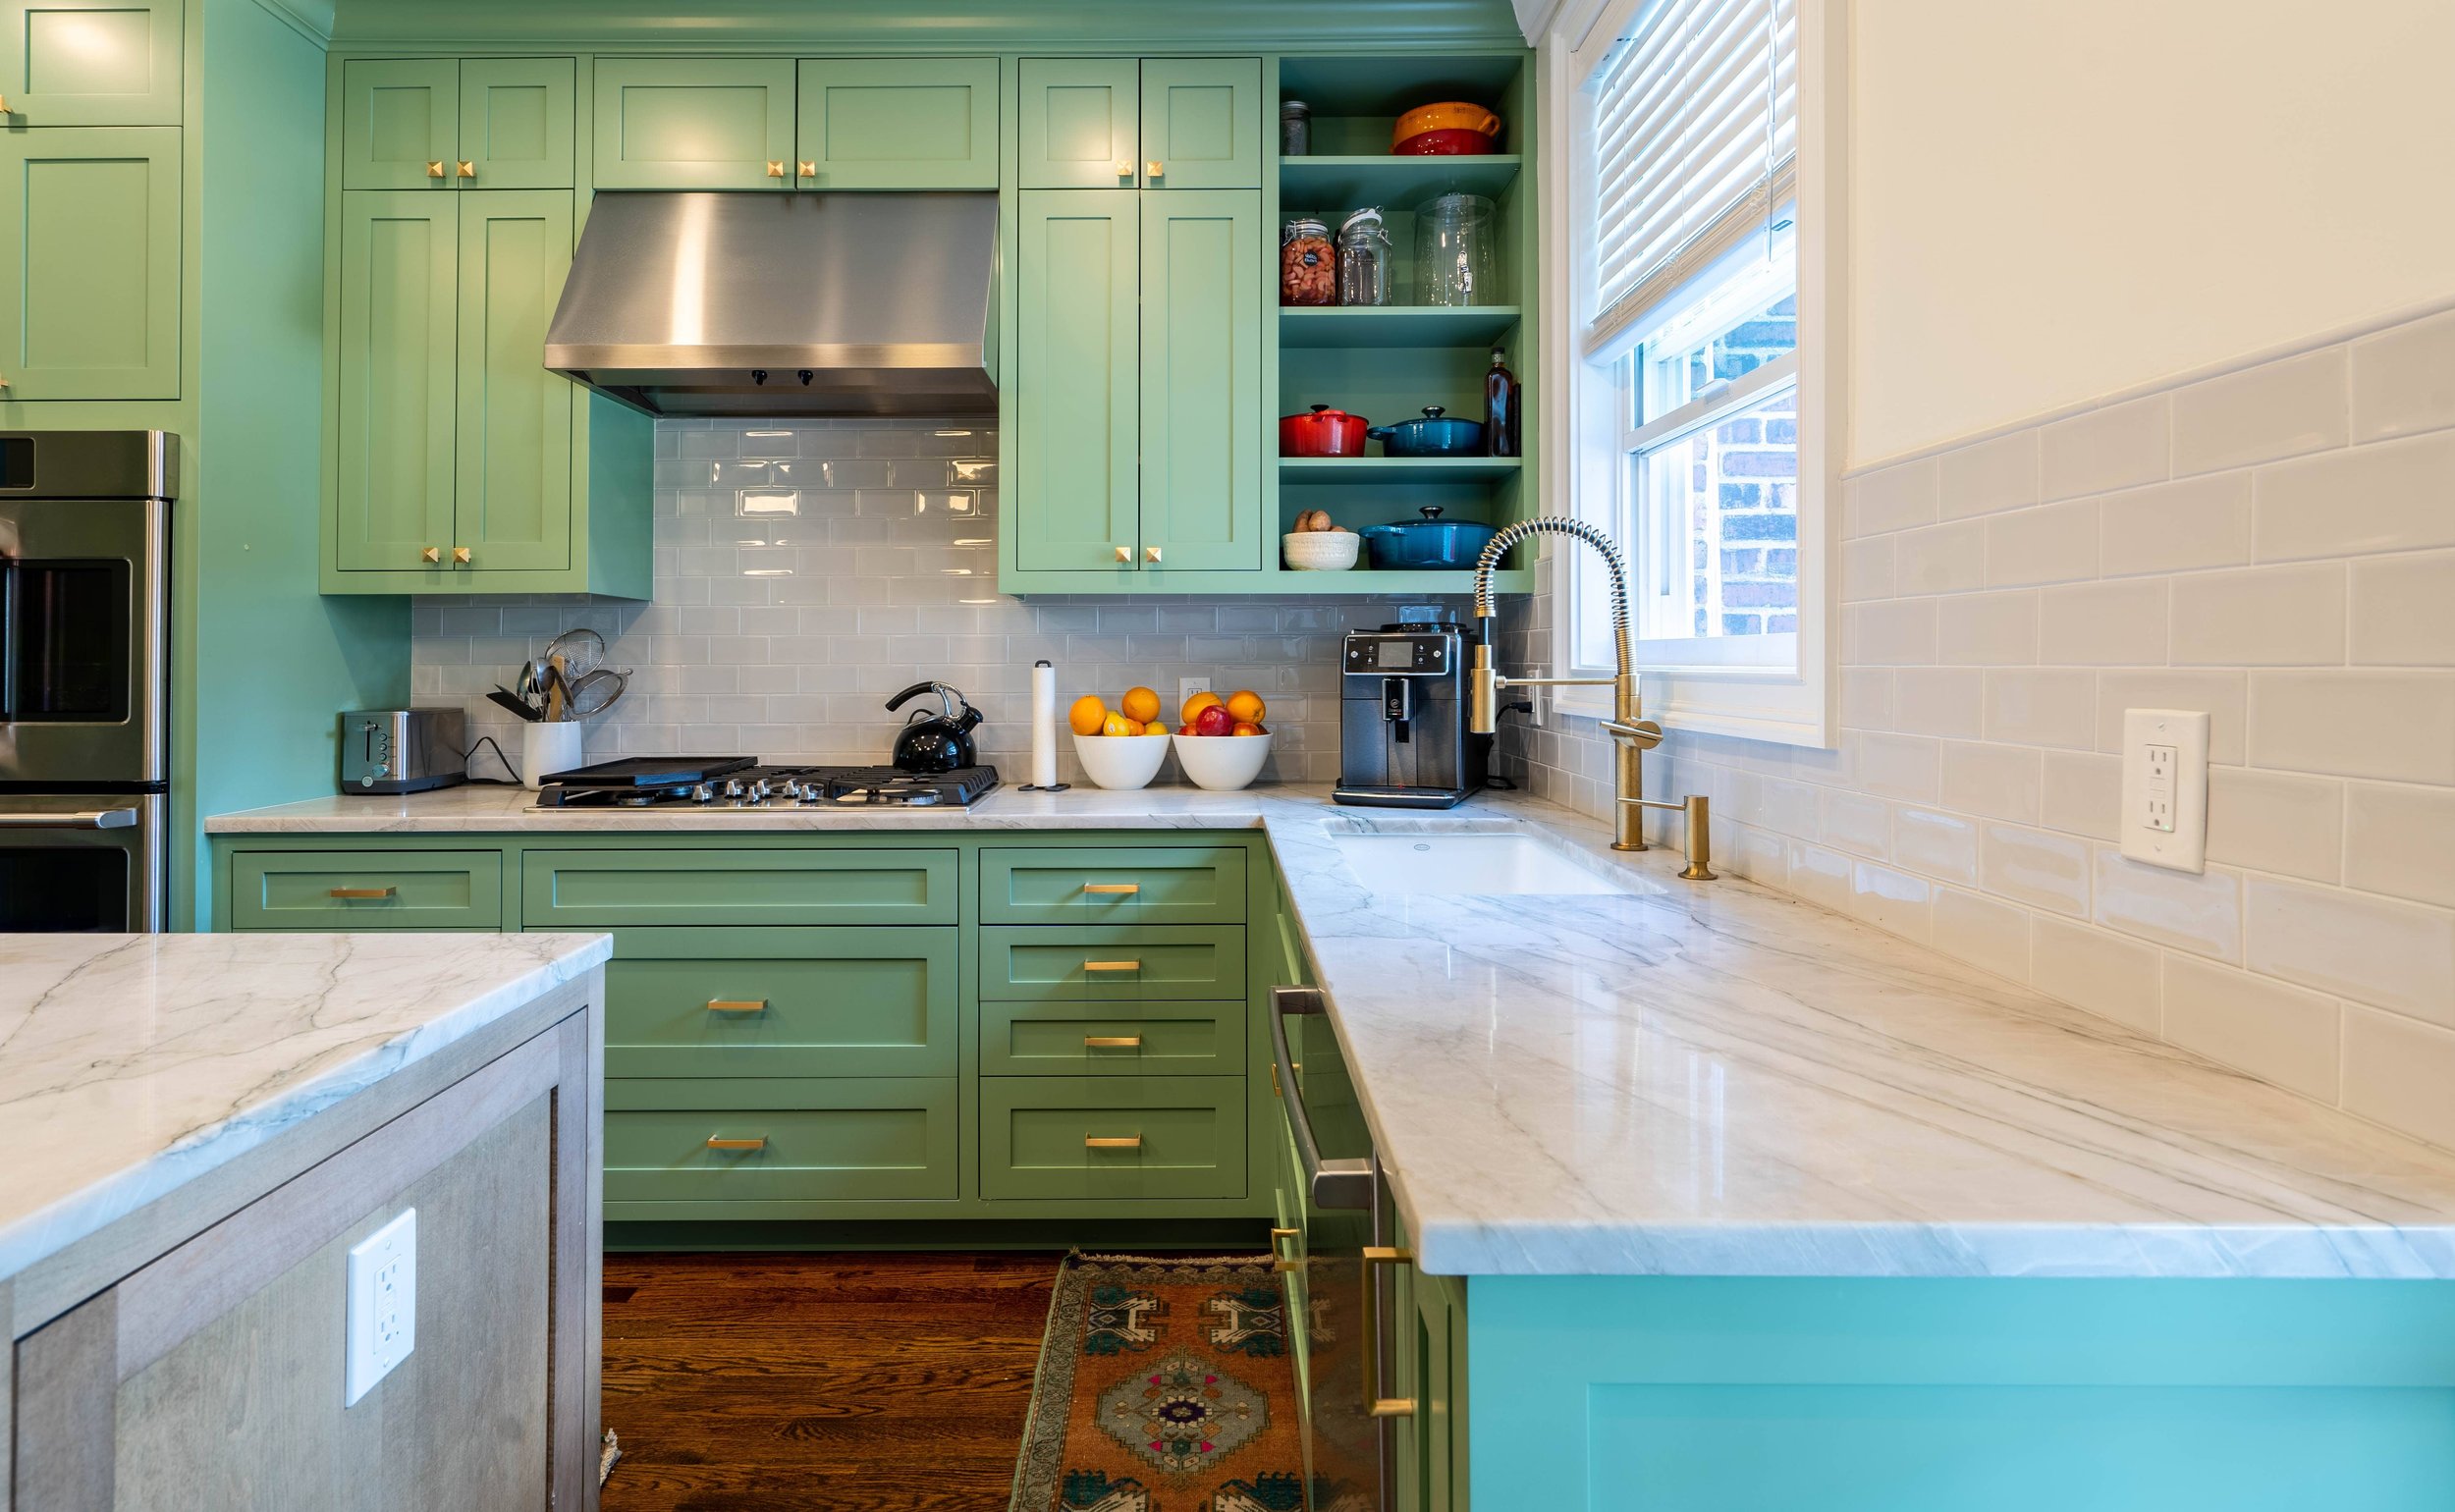 Green kitchen ideas: Decorating with shades from sage to forest